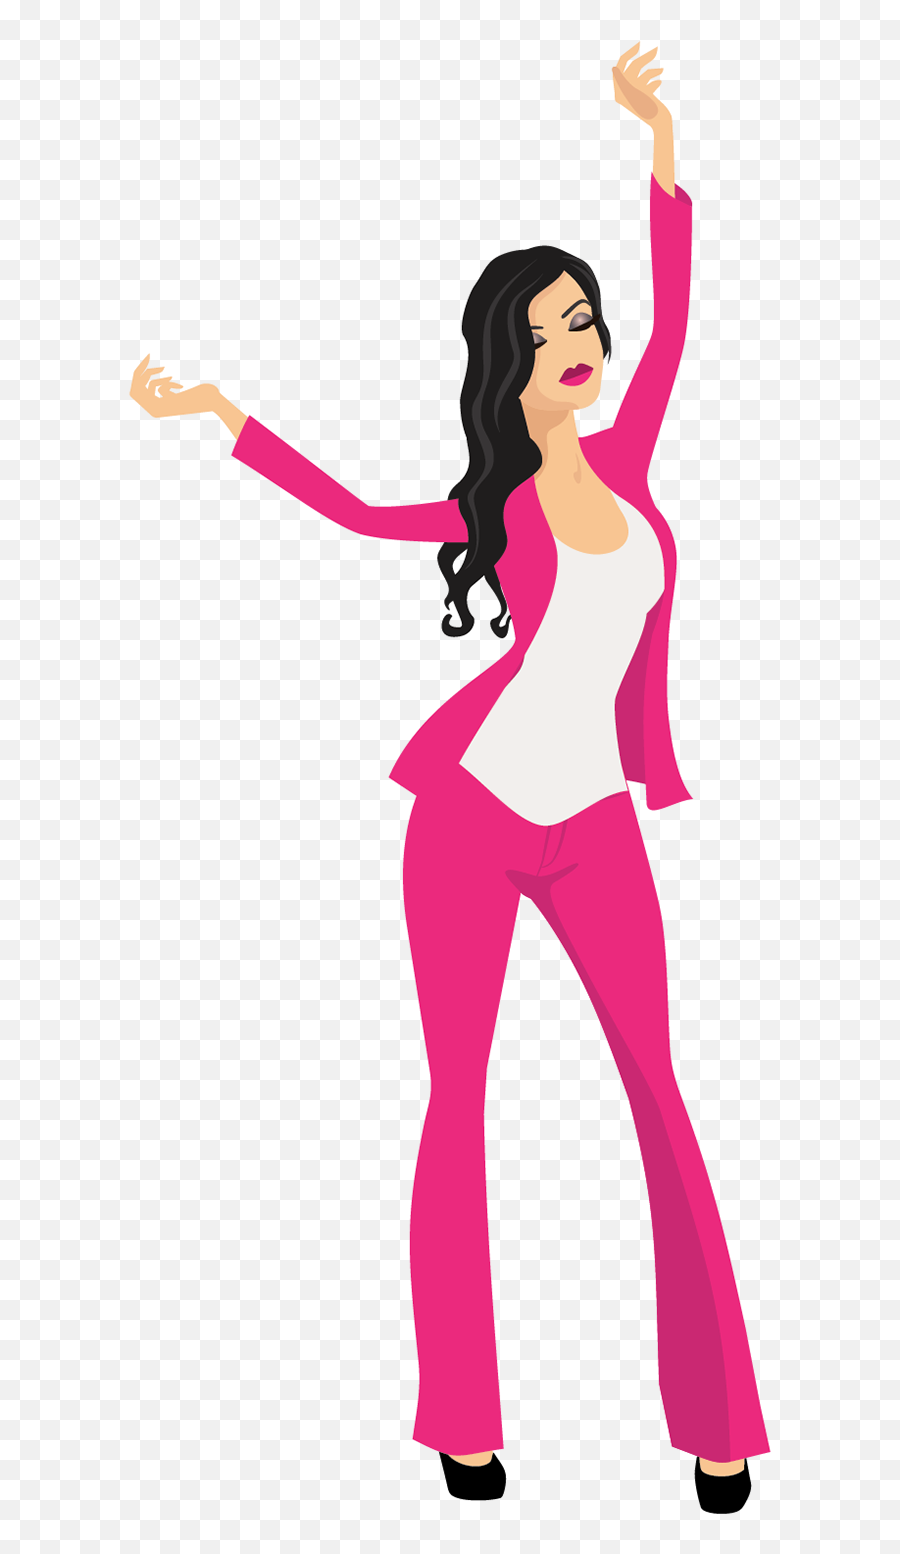 Divas Day Out 2020 Branding And Logo On Behance Emoji,Dancing Male And Female Emoji